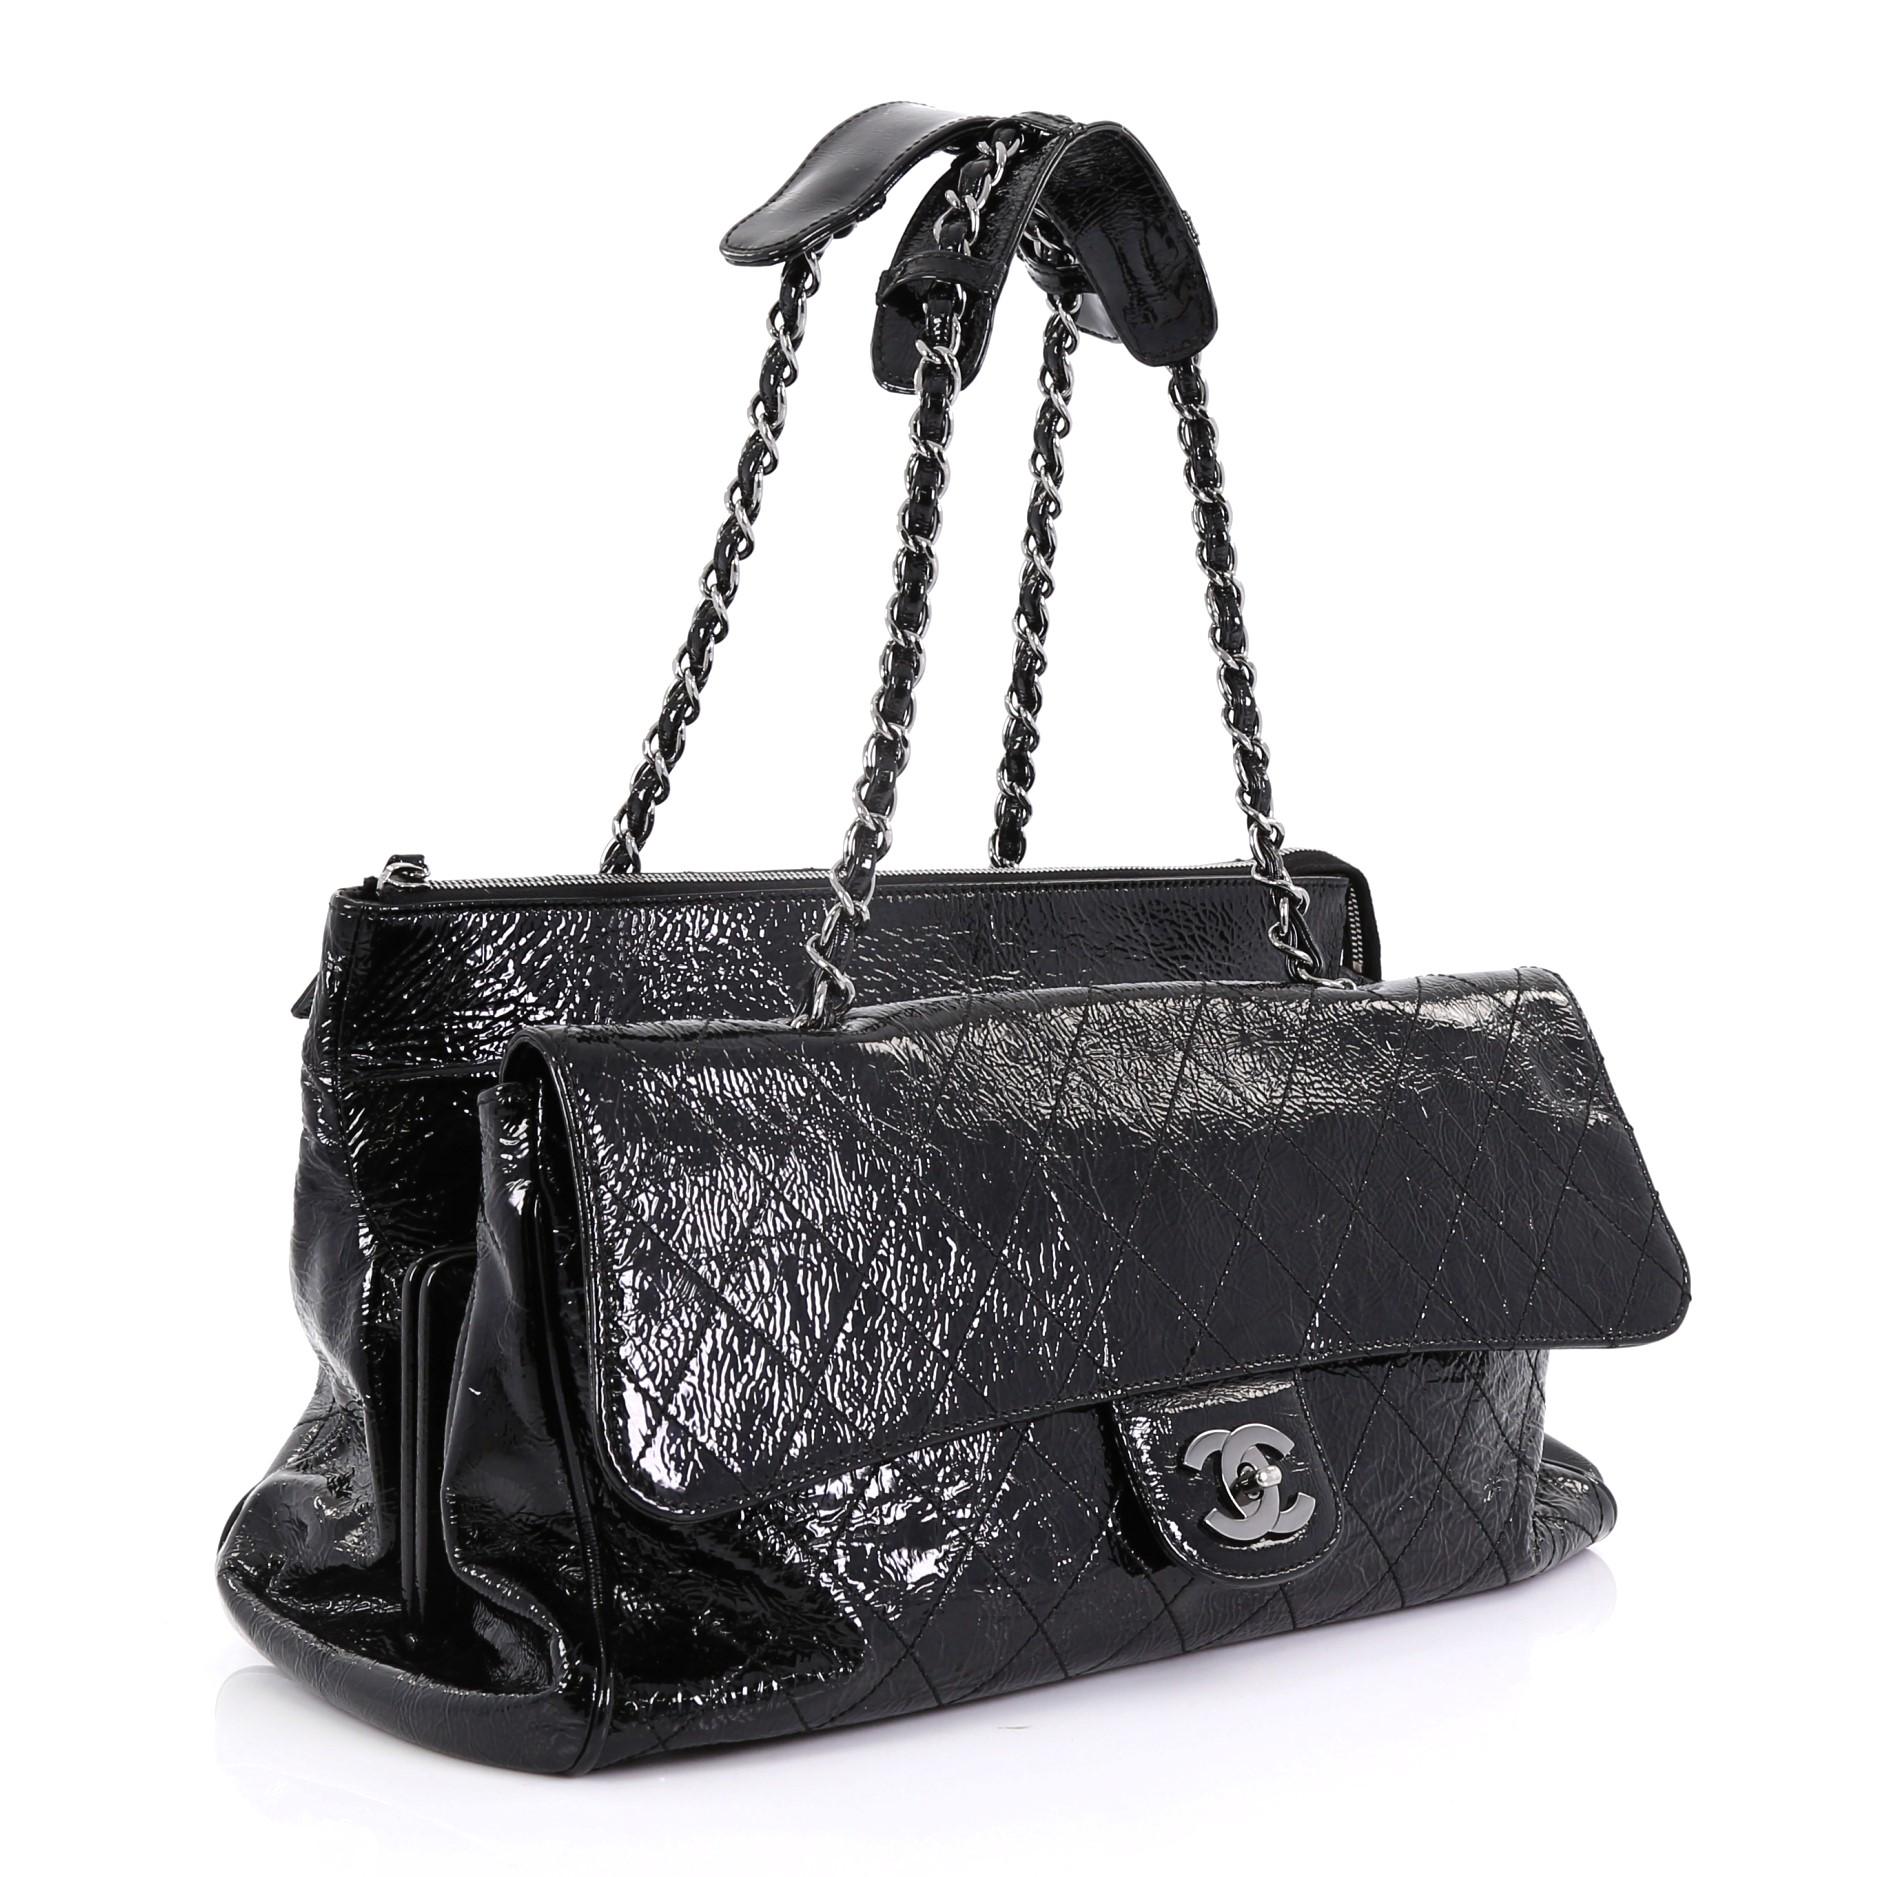 This Chanel Ritz Flap Bag Quilted Patent Large, crafted from black quilted patent leather, features dual woven-in leather chain straps with shoulder pads, exterior flap compartment with CC turn-lock closure, middle framed compartment with push-pin